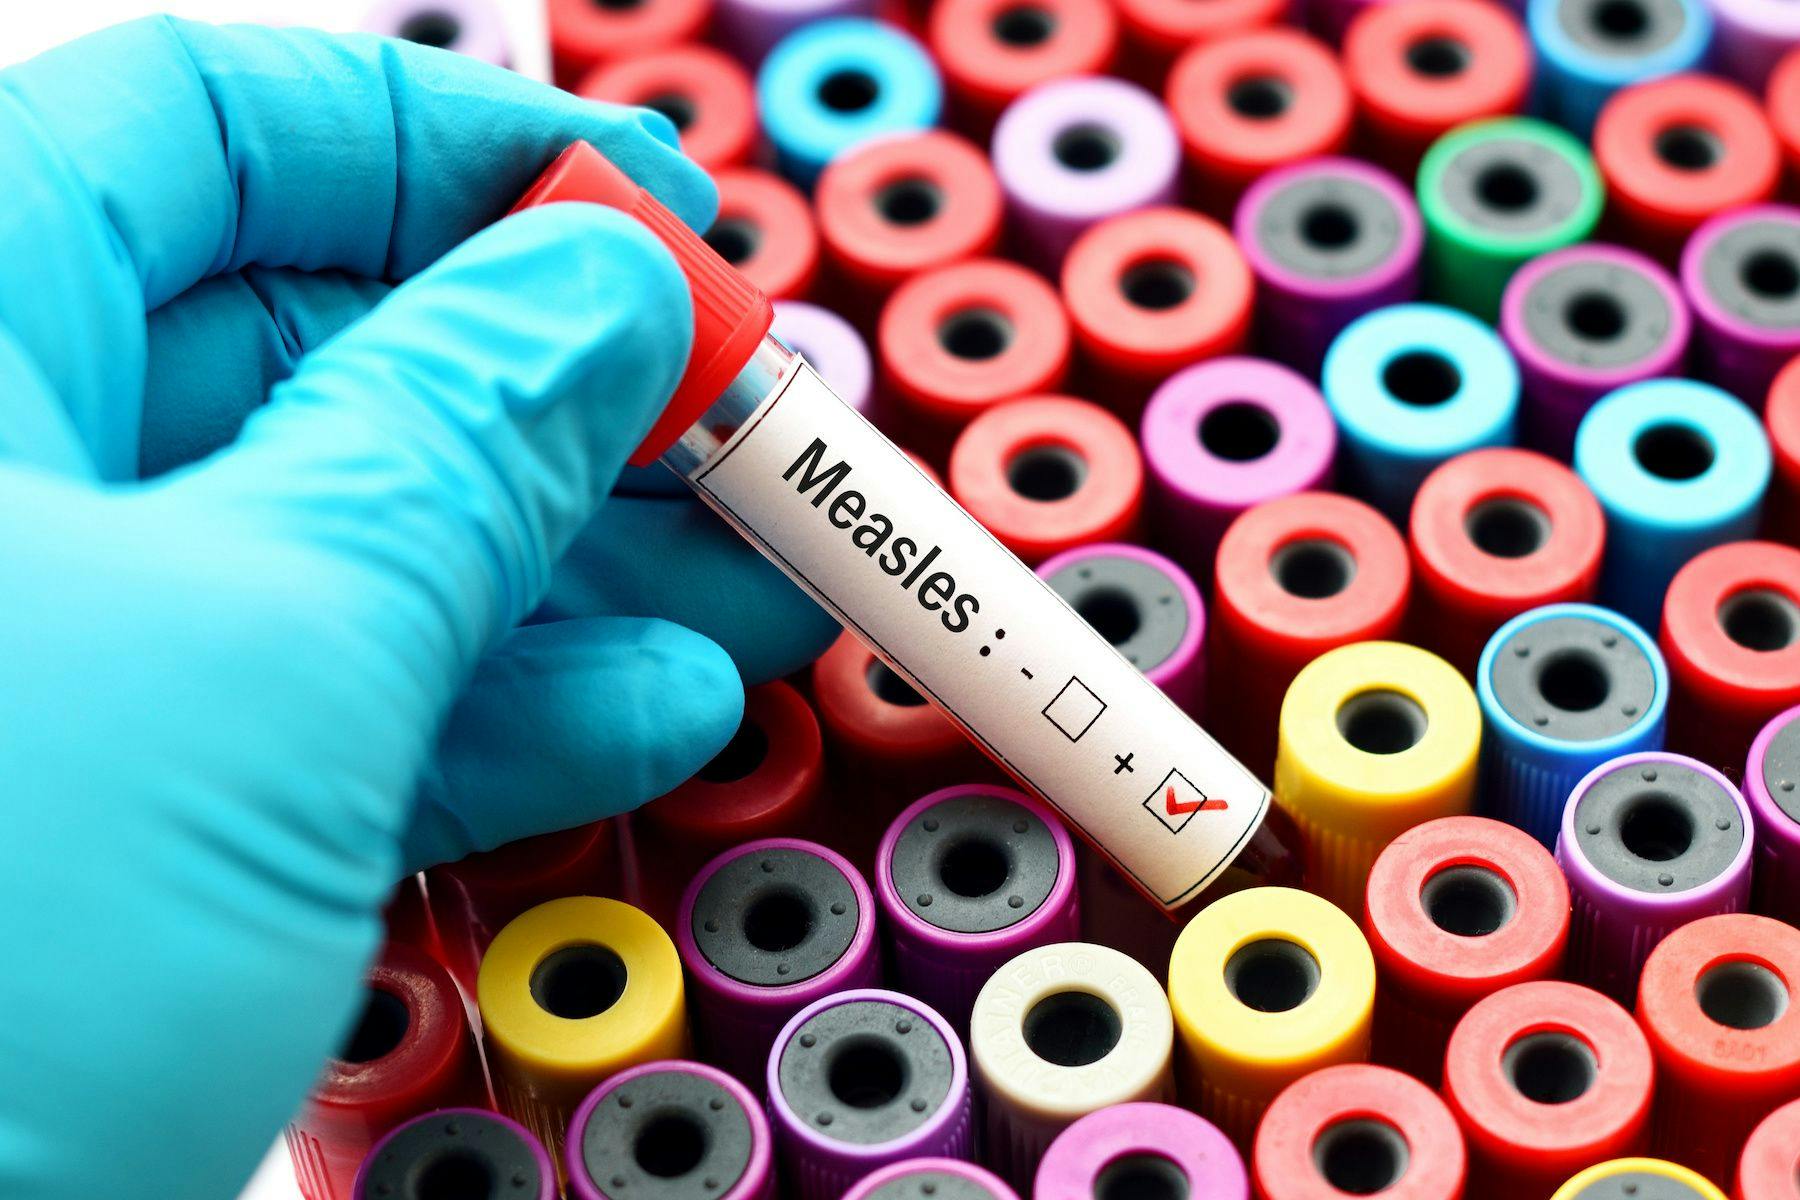 blood sample of measles patient